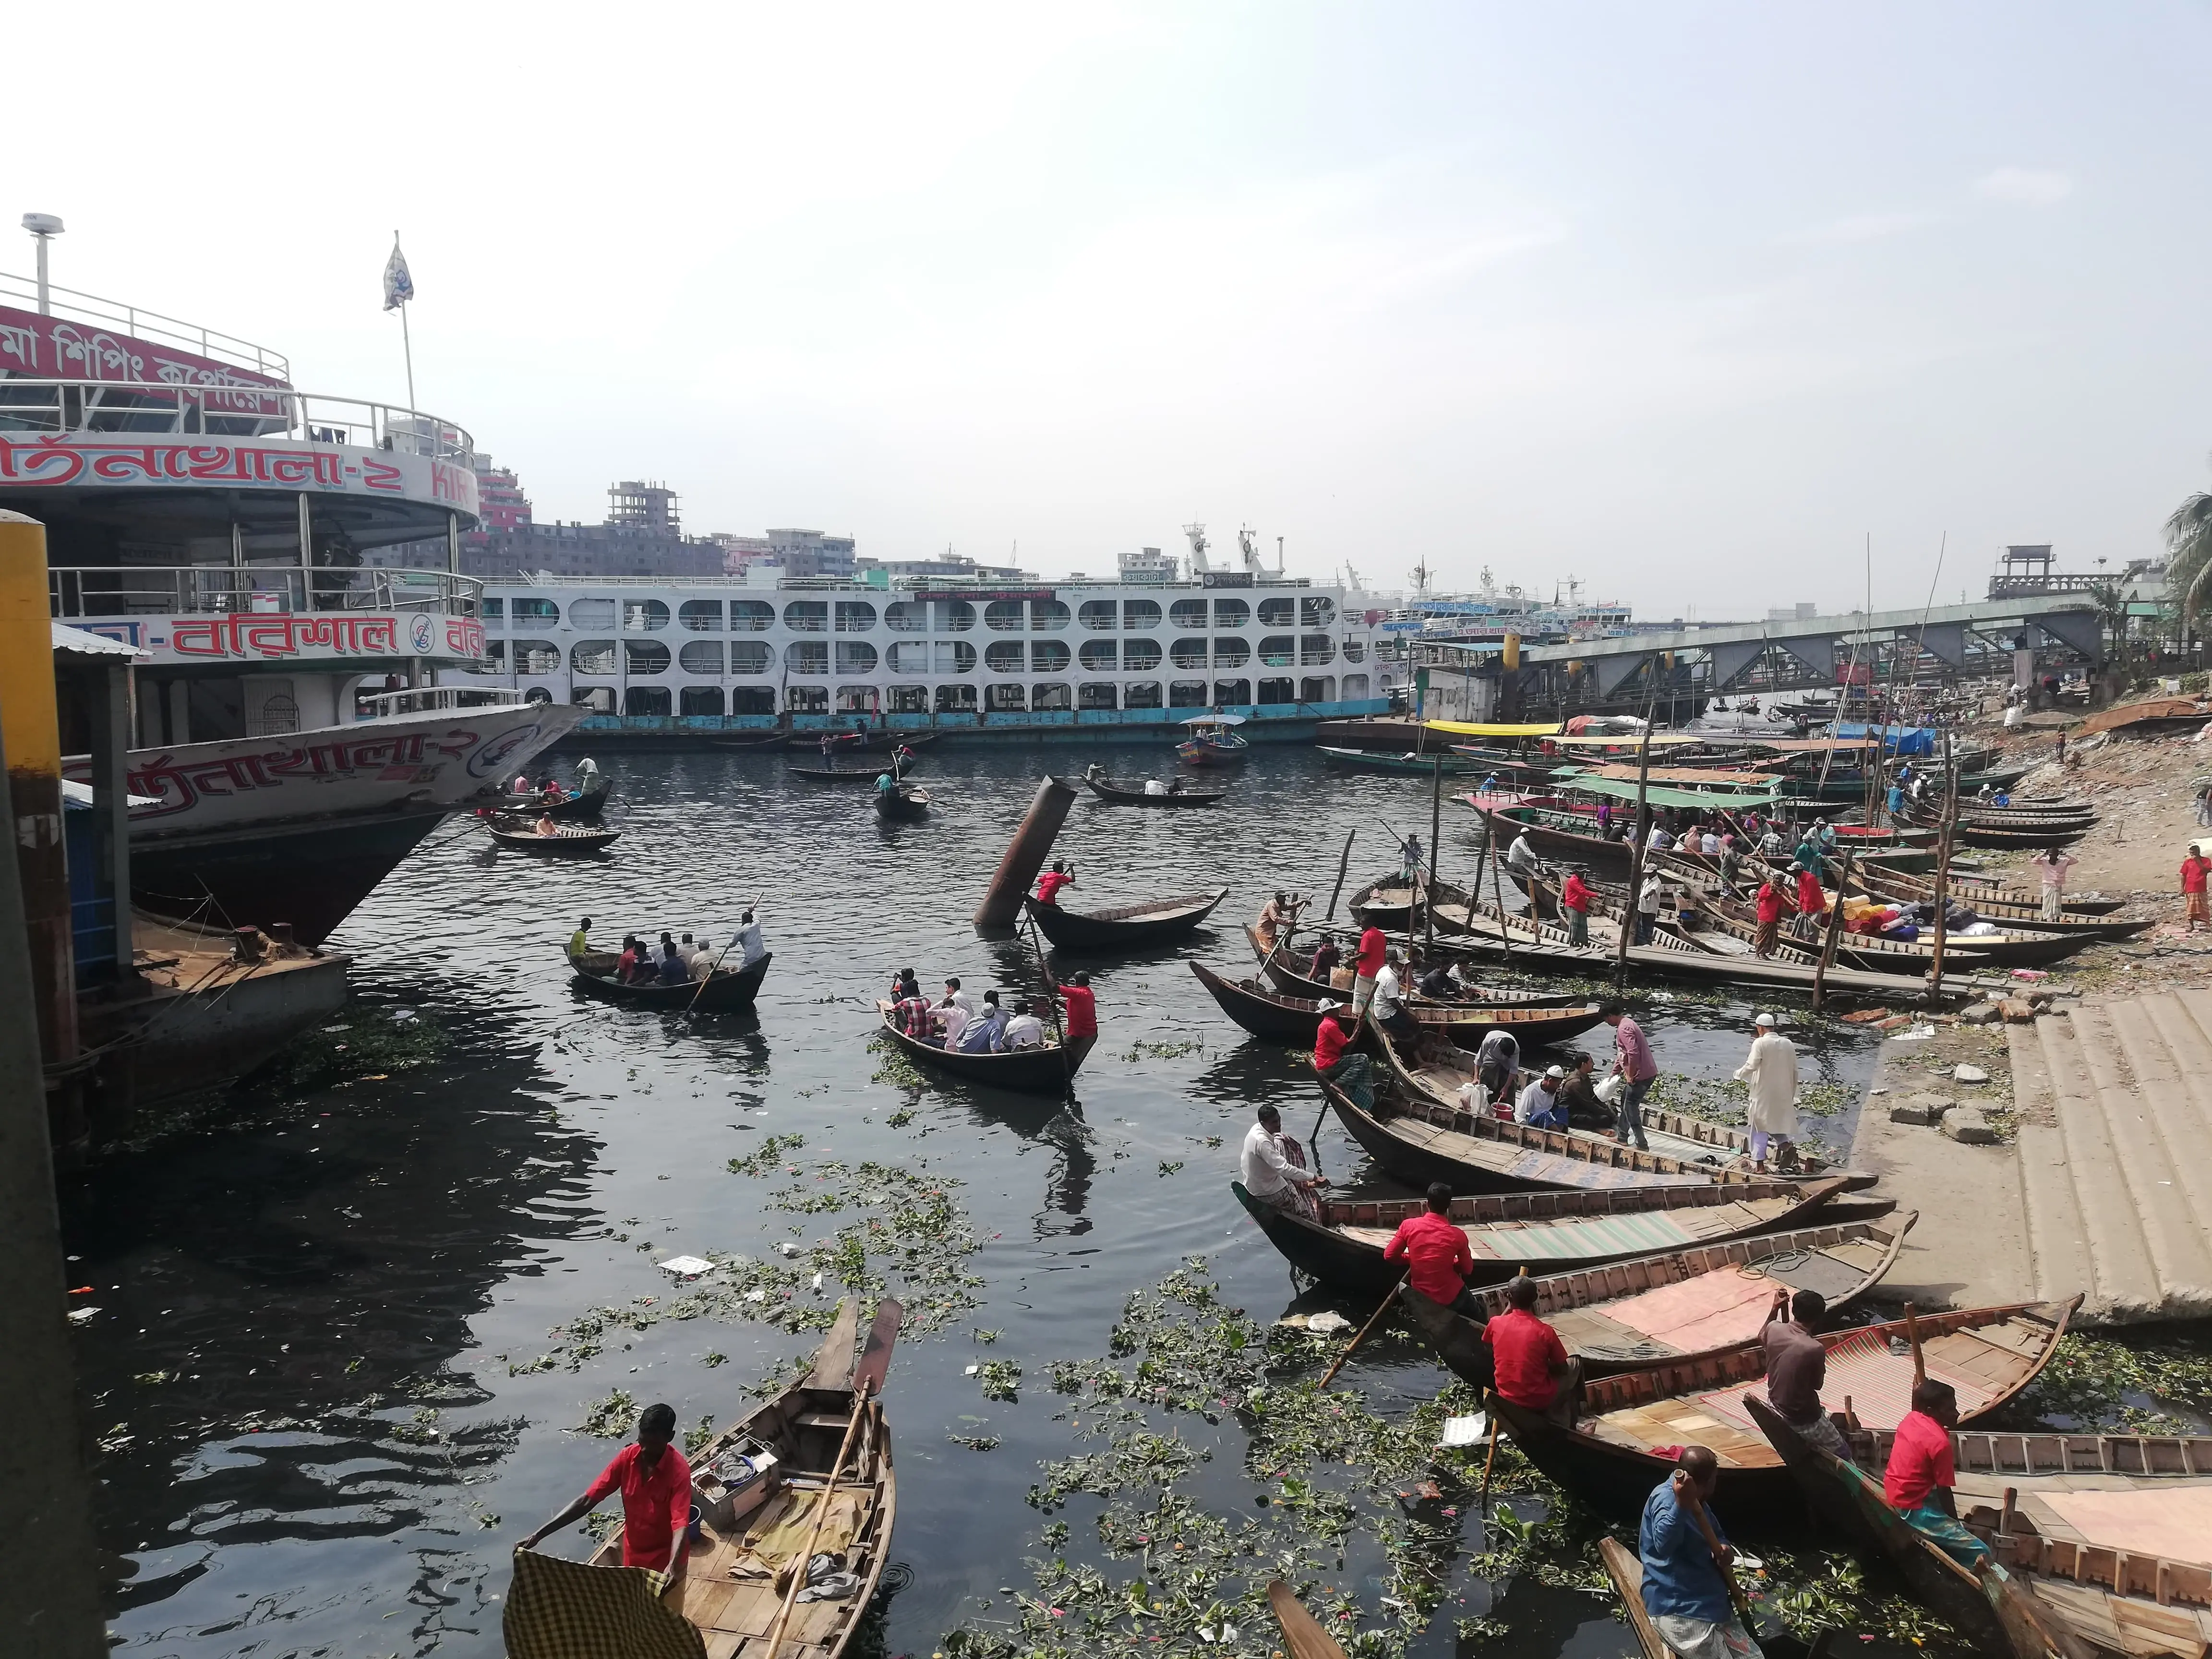 The Port of Dhaka, located in the capital and largest city of Bangladesh